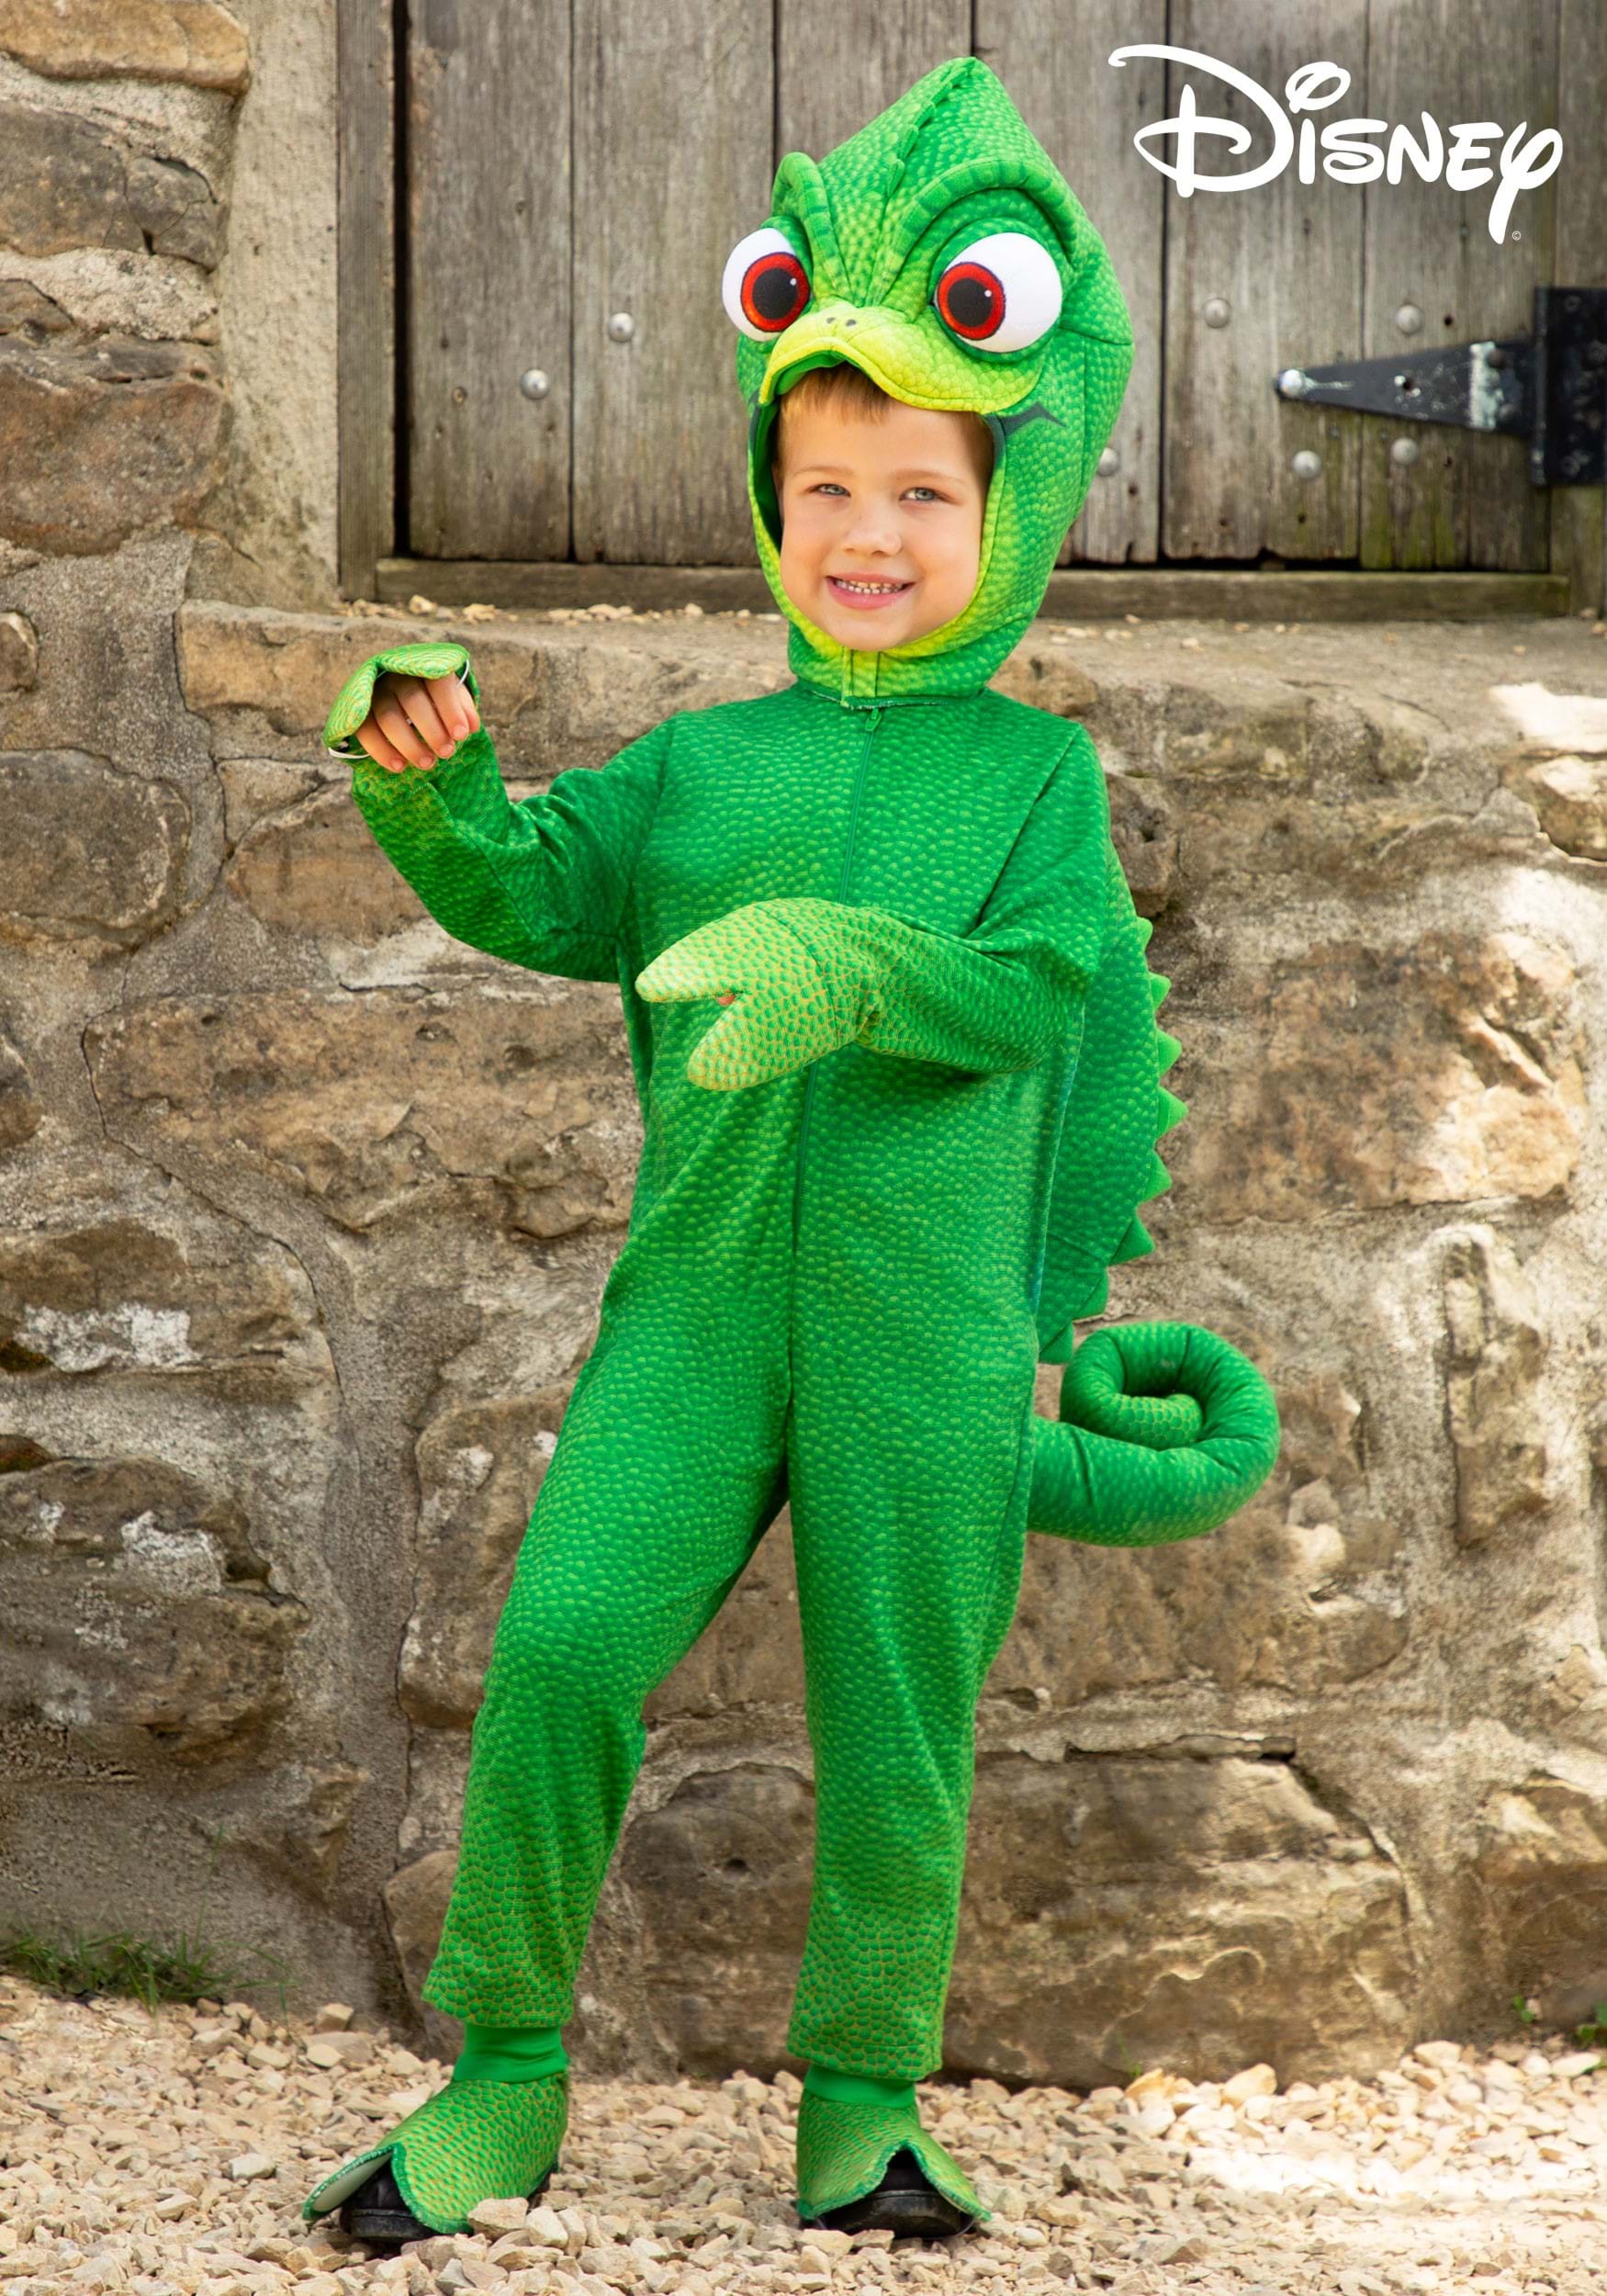 https://images.halloweencostumes.com/products/68965/1-1/toddler-pascal-tangled-costume-upd.jpg